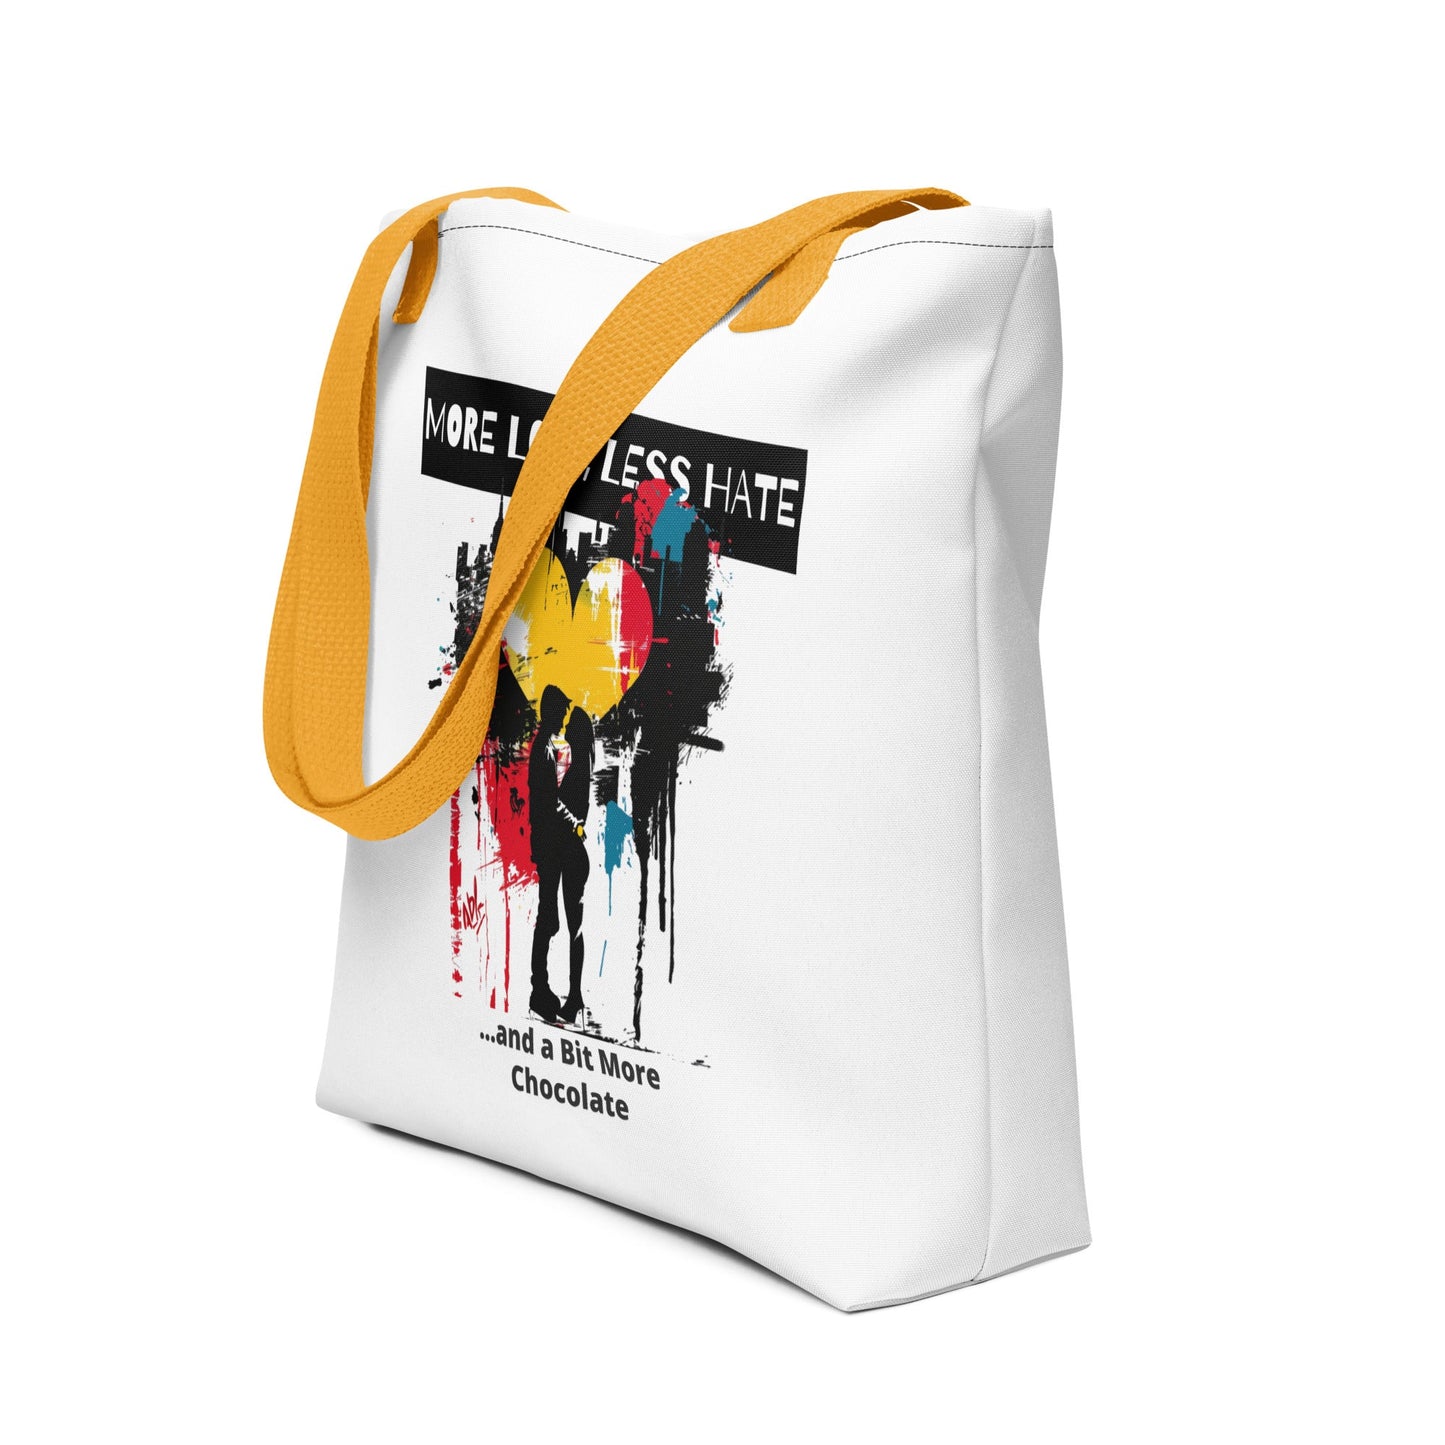 More love, less hate, and a bit more chocolate - Tote bag - StreetHeartCreations